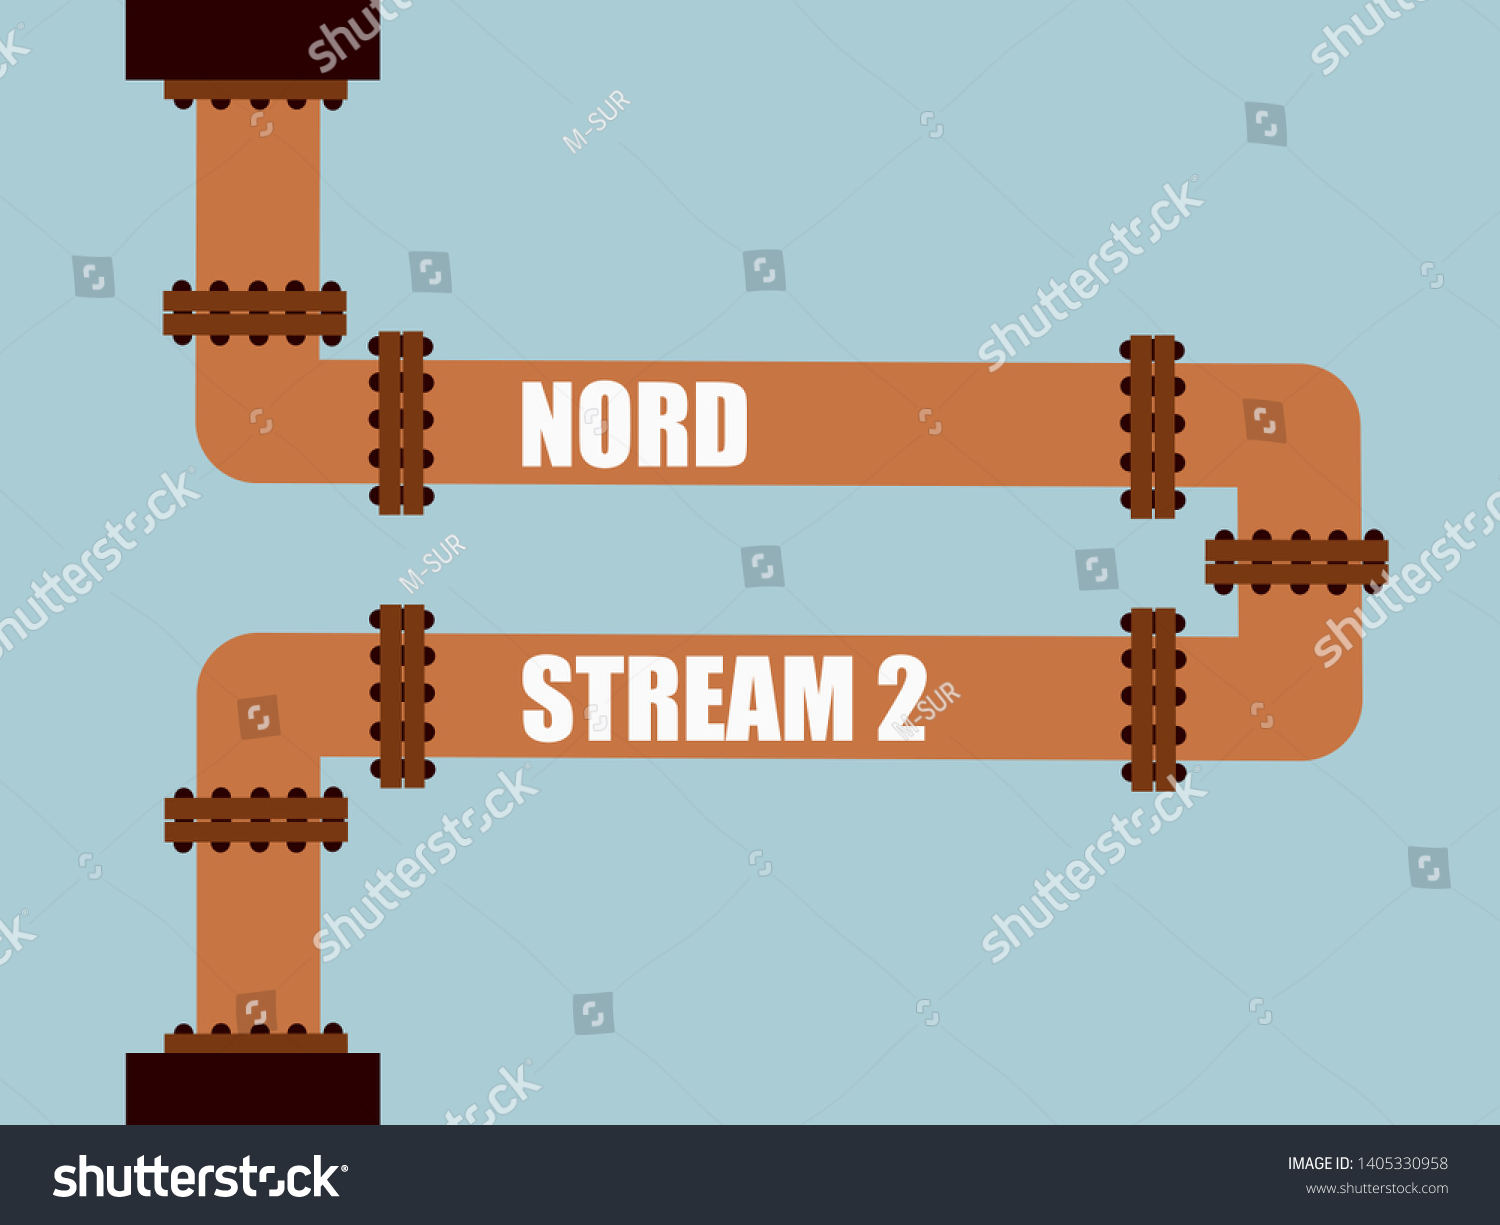 nord Current 2 pipeline Arguing